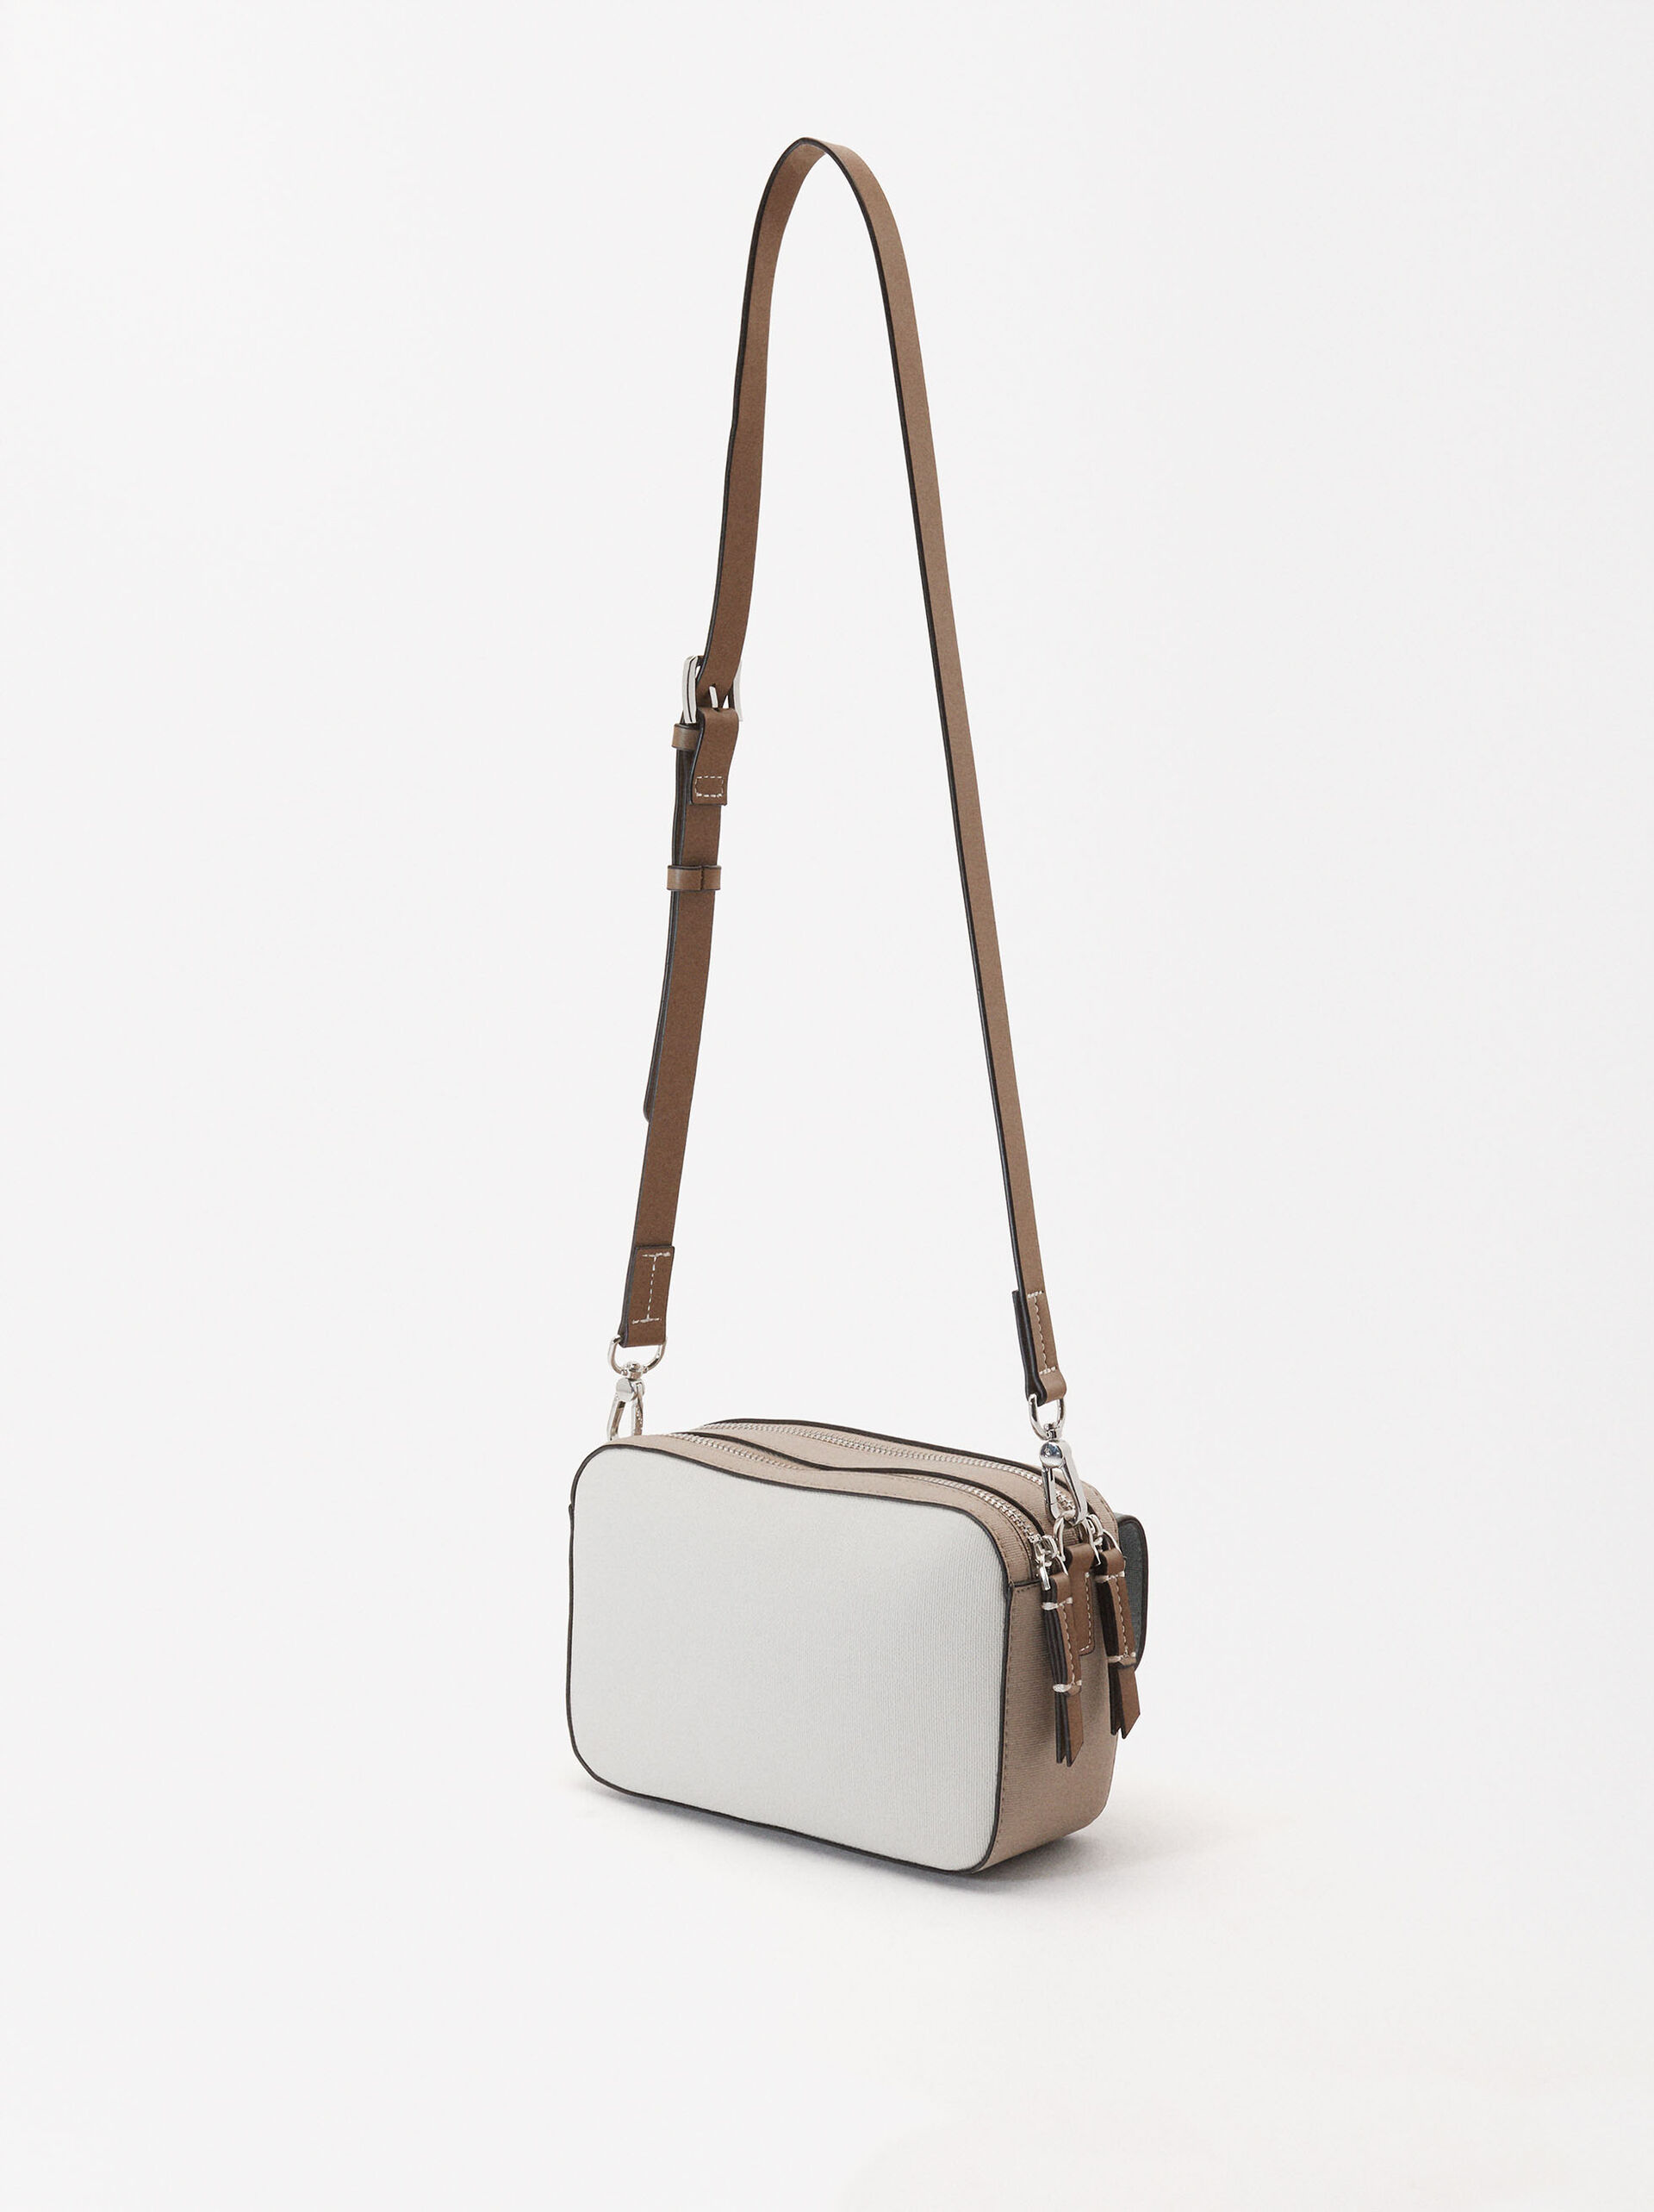 Crossbody Bag With Outer Pocket image number 2.0